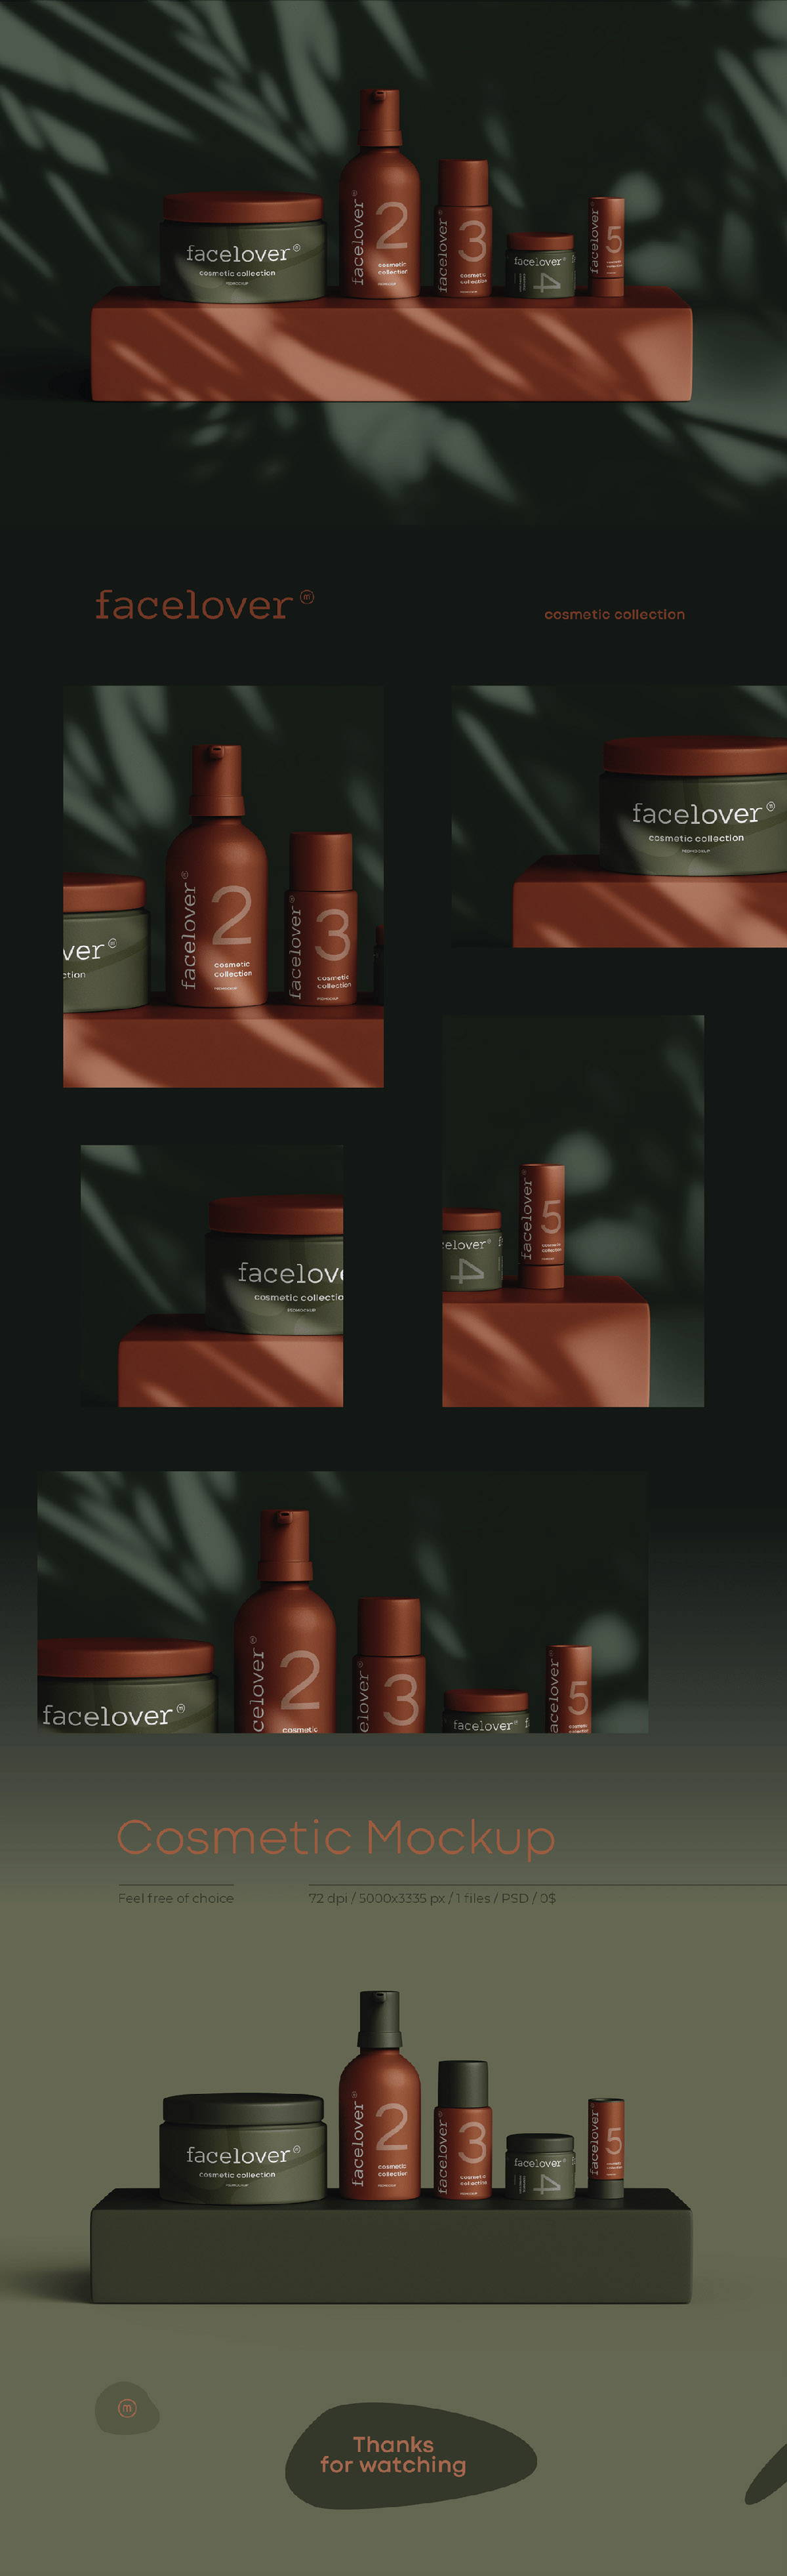 Clean and Minimal Looks Cosmetics Items Packaging Mockups